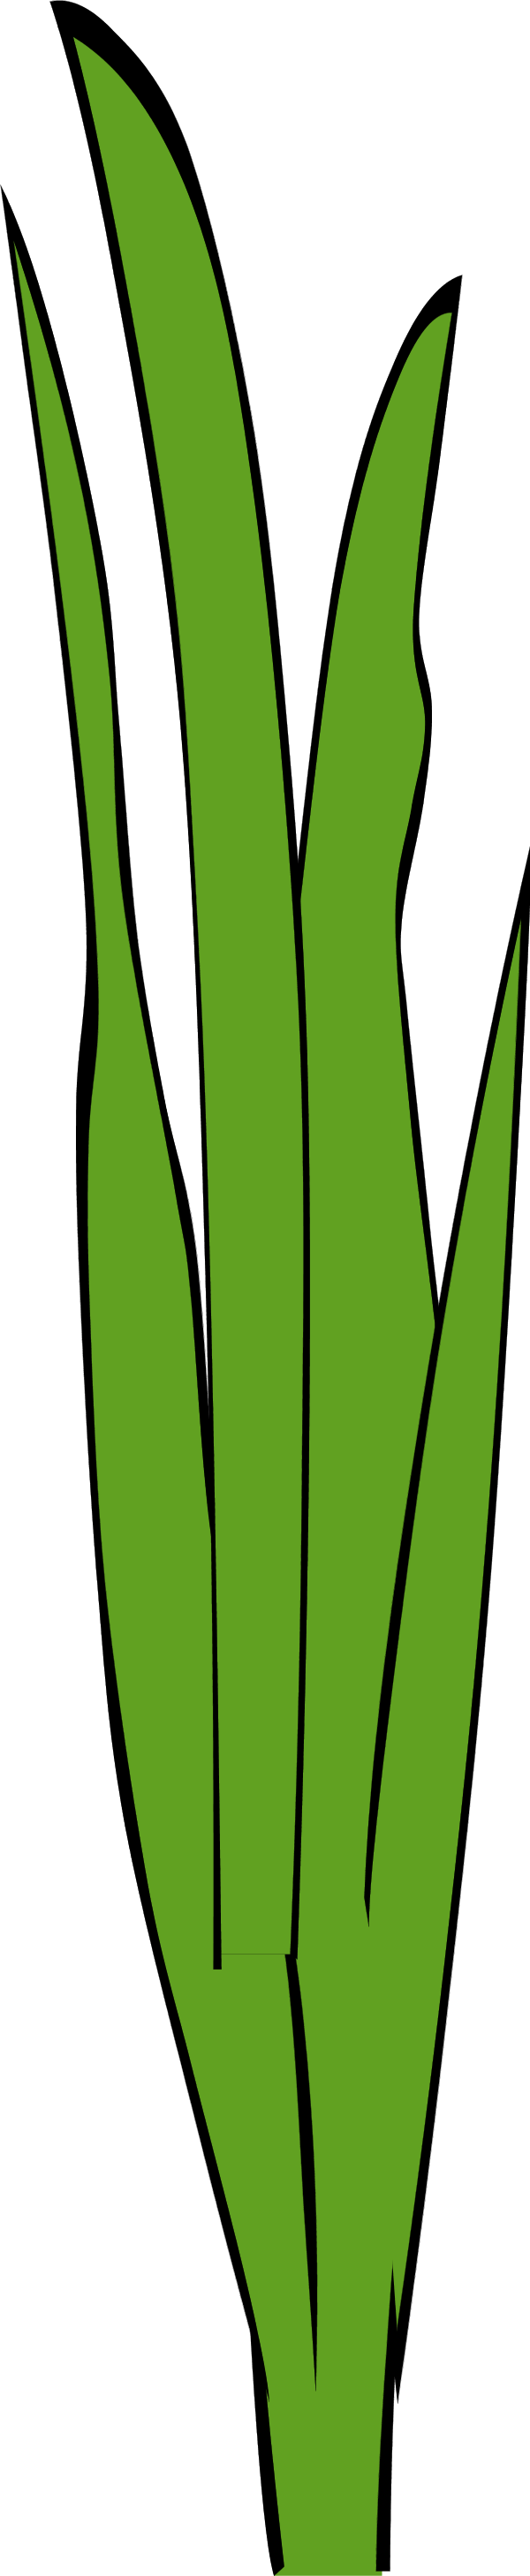 Sea Grass Clipart Animated - Blade Of Grass Clipart (600x2918)